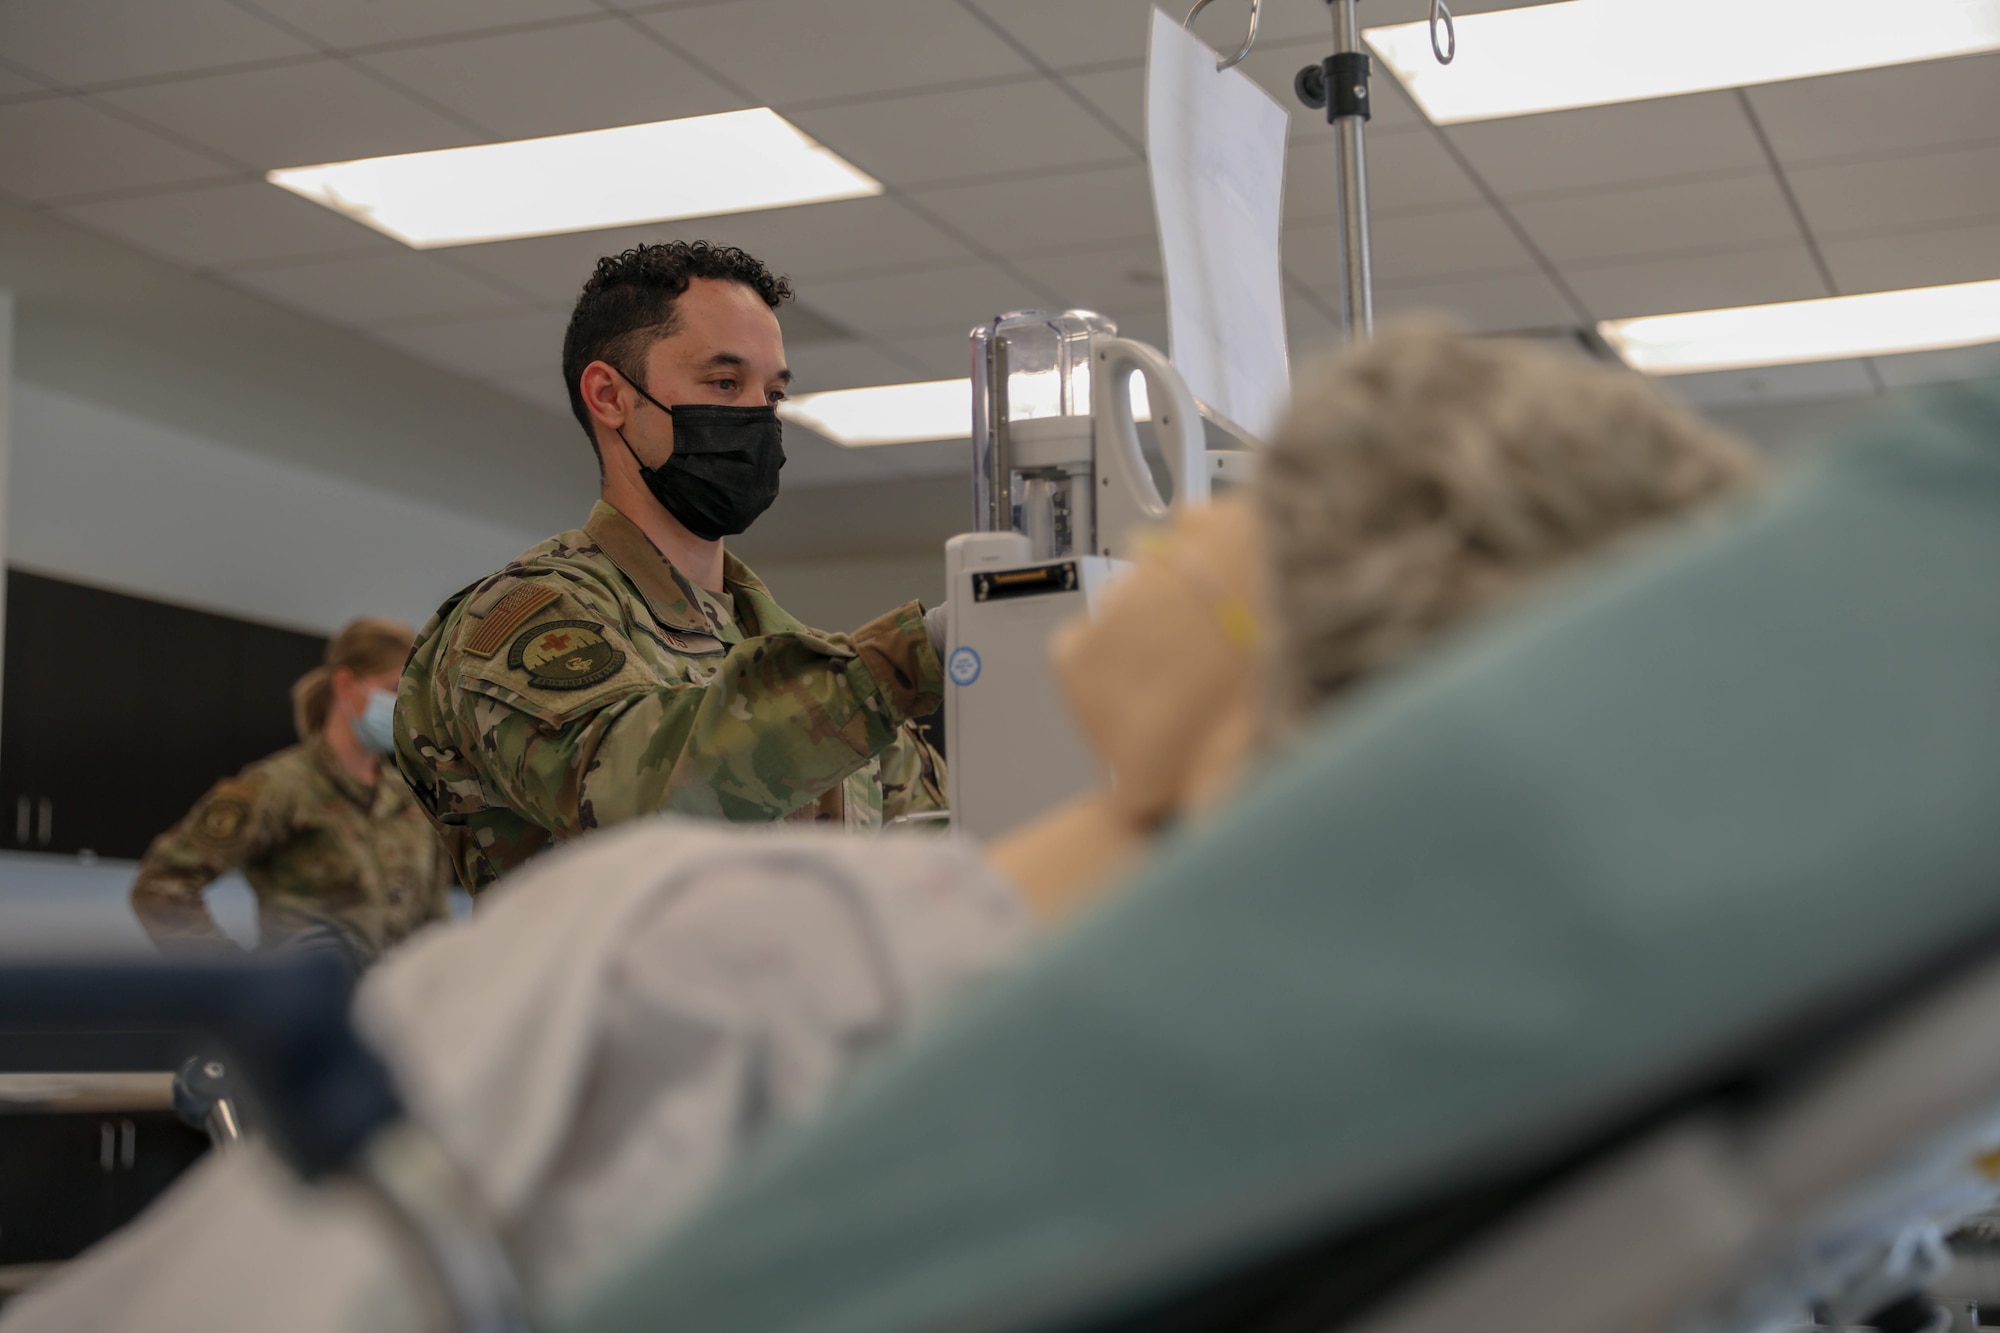 Image of a Service member helping a patient.